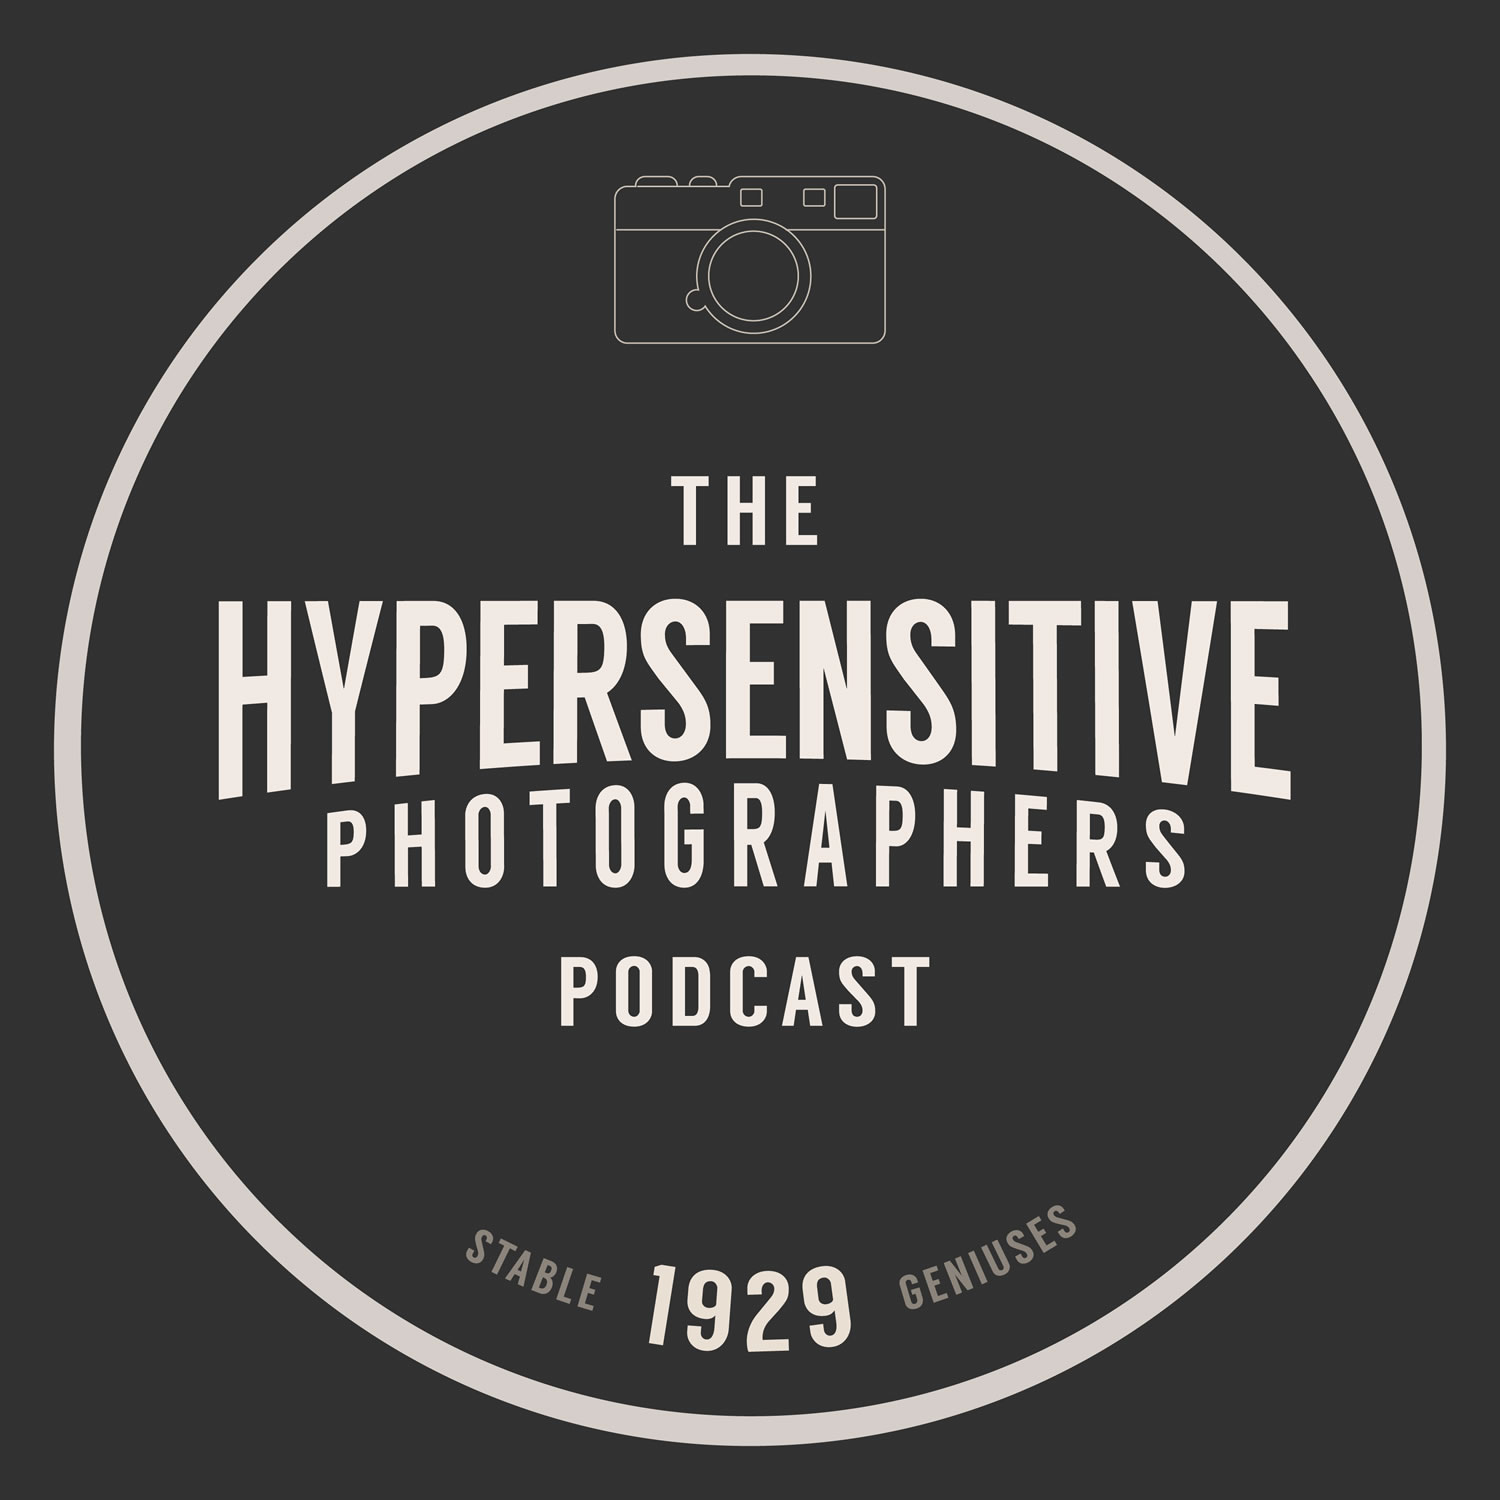 The Hypersensitive Podcast Episode 12: The JCH premium rate chat line